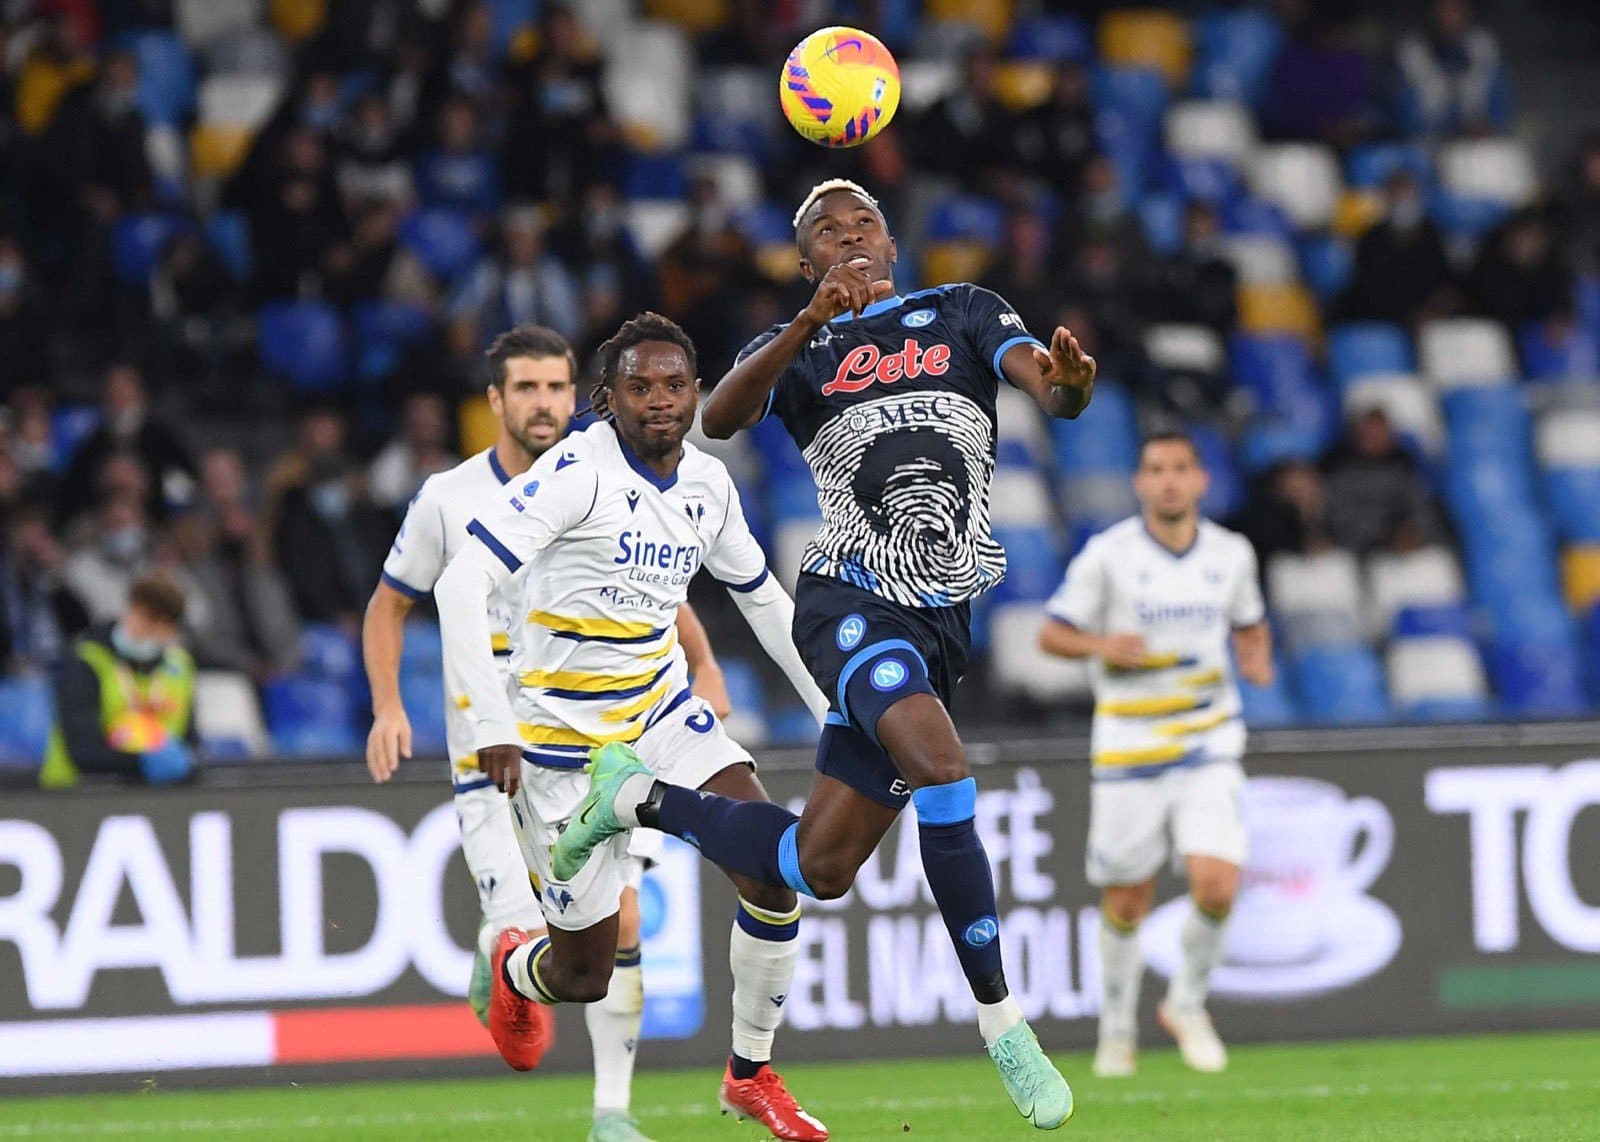 Osimhen Returns From Injury As Nine-Man Verona Frustrate Napoli To 1-1 Draw 